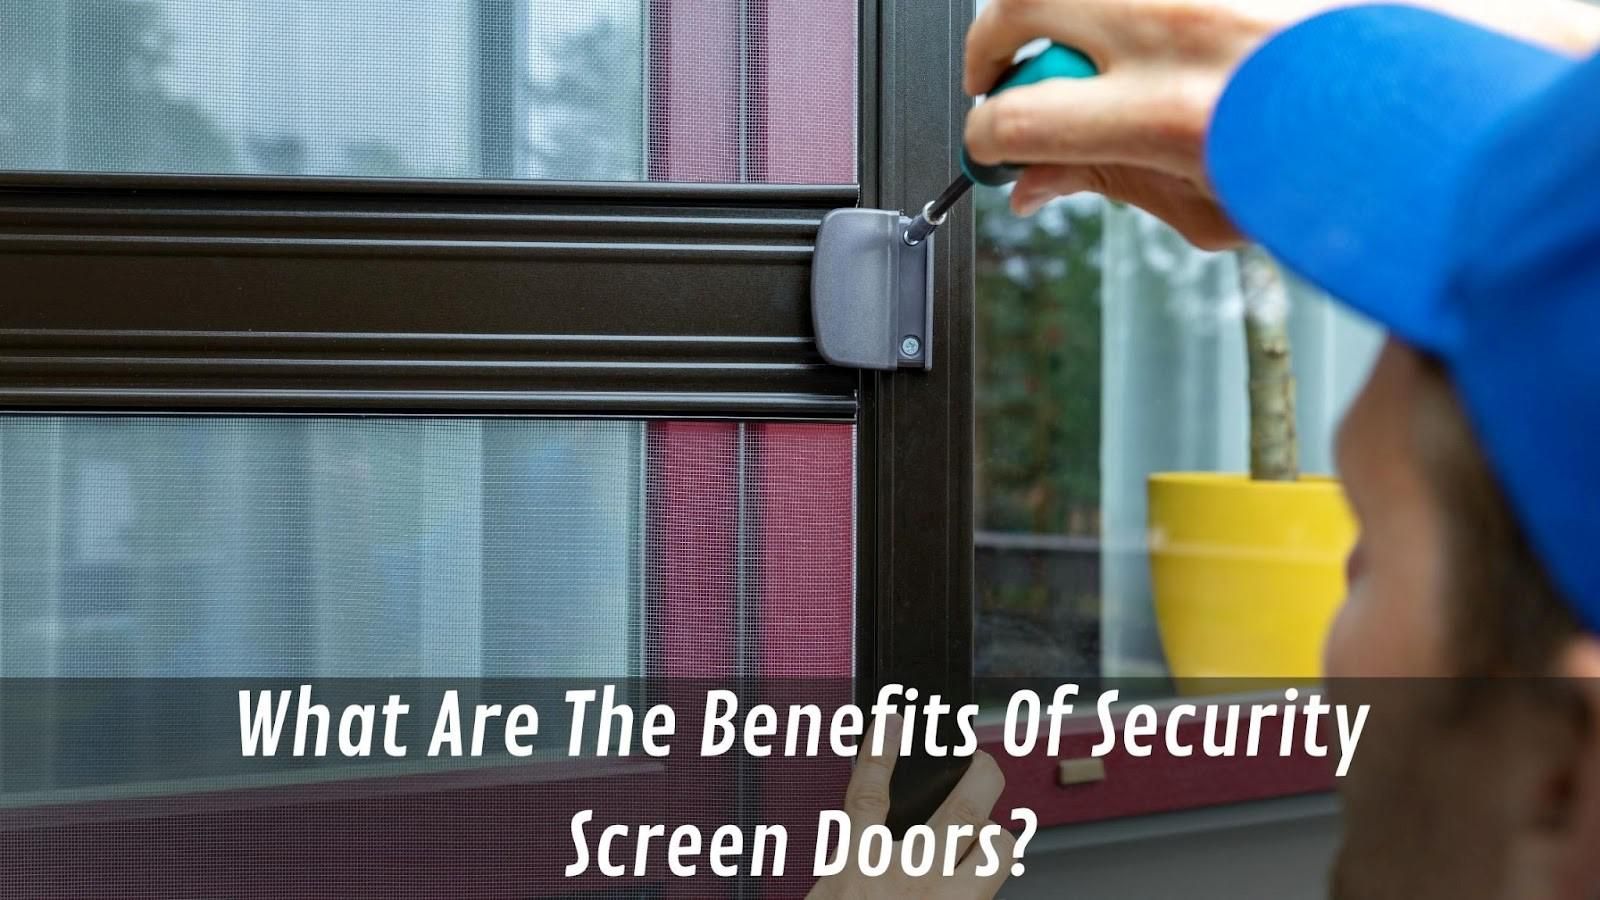 What Are The Benefits Of Screen Doors?